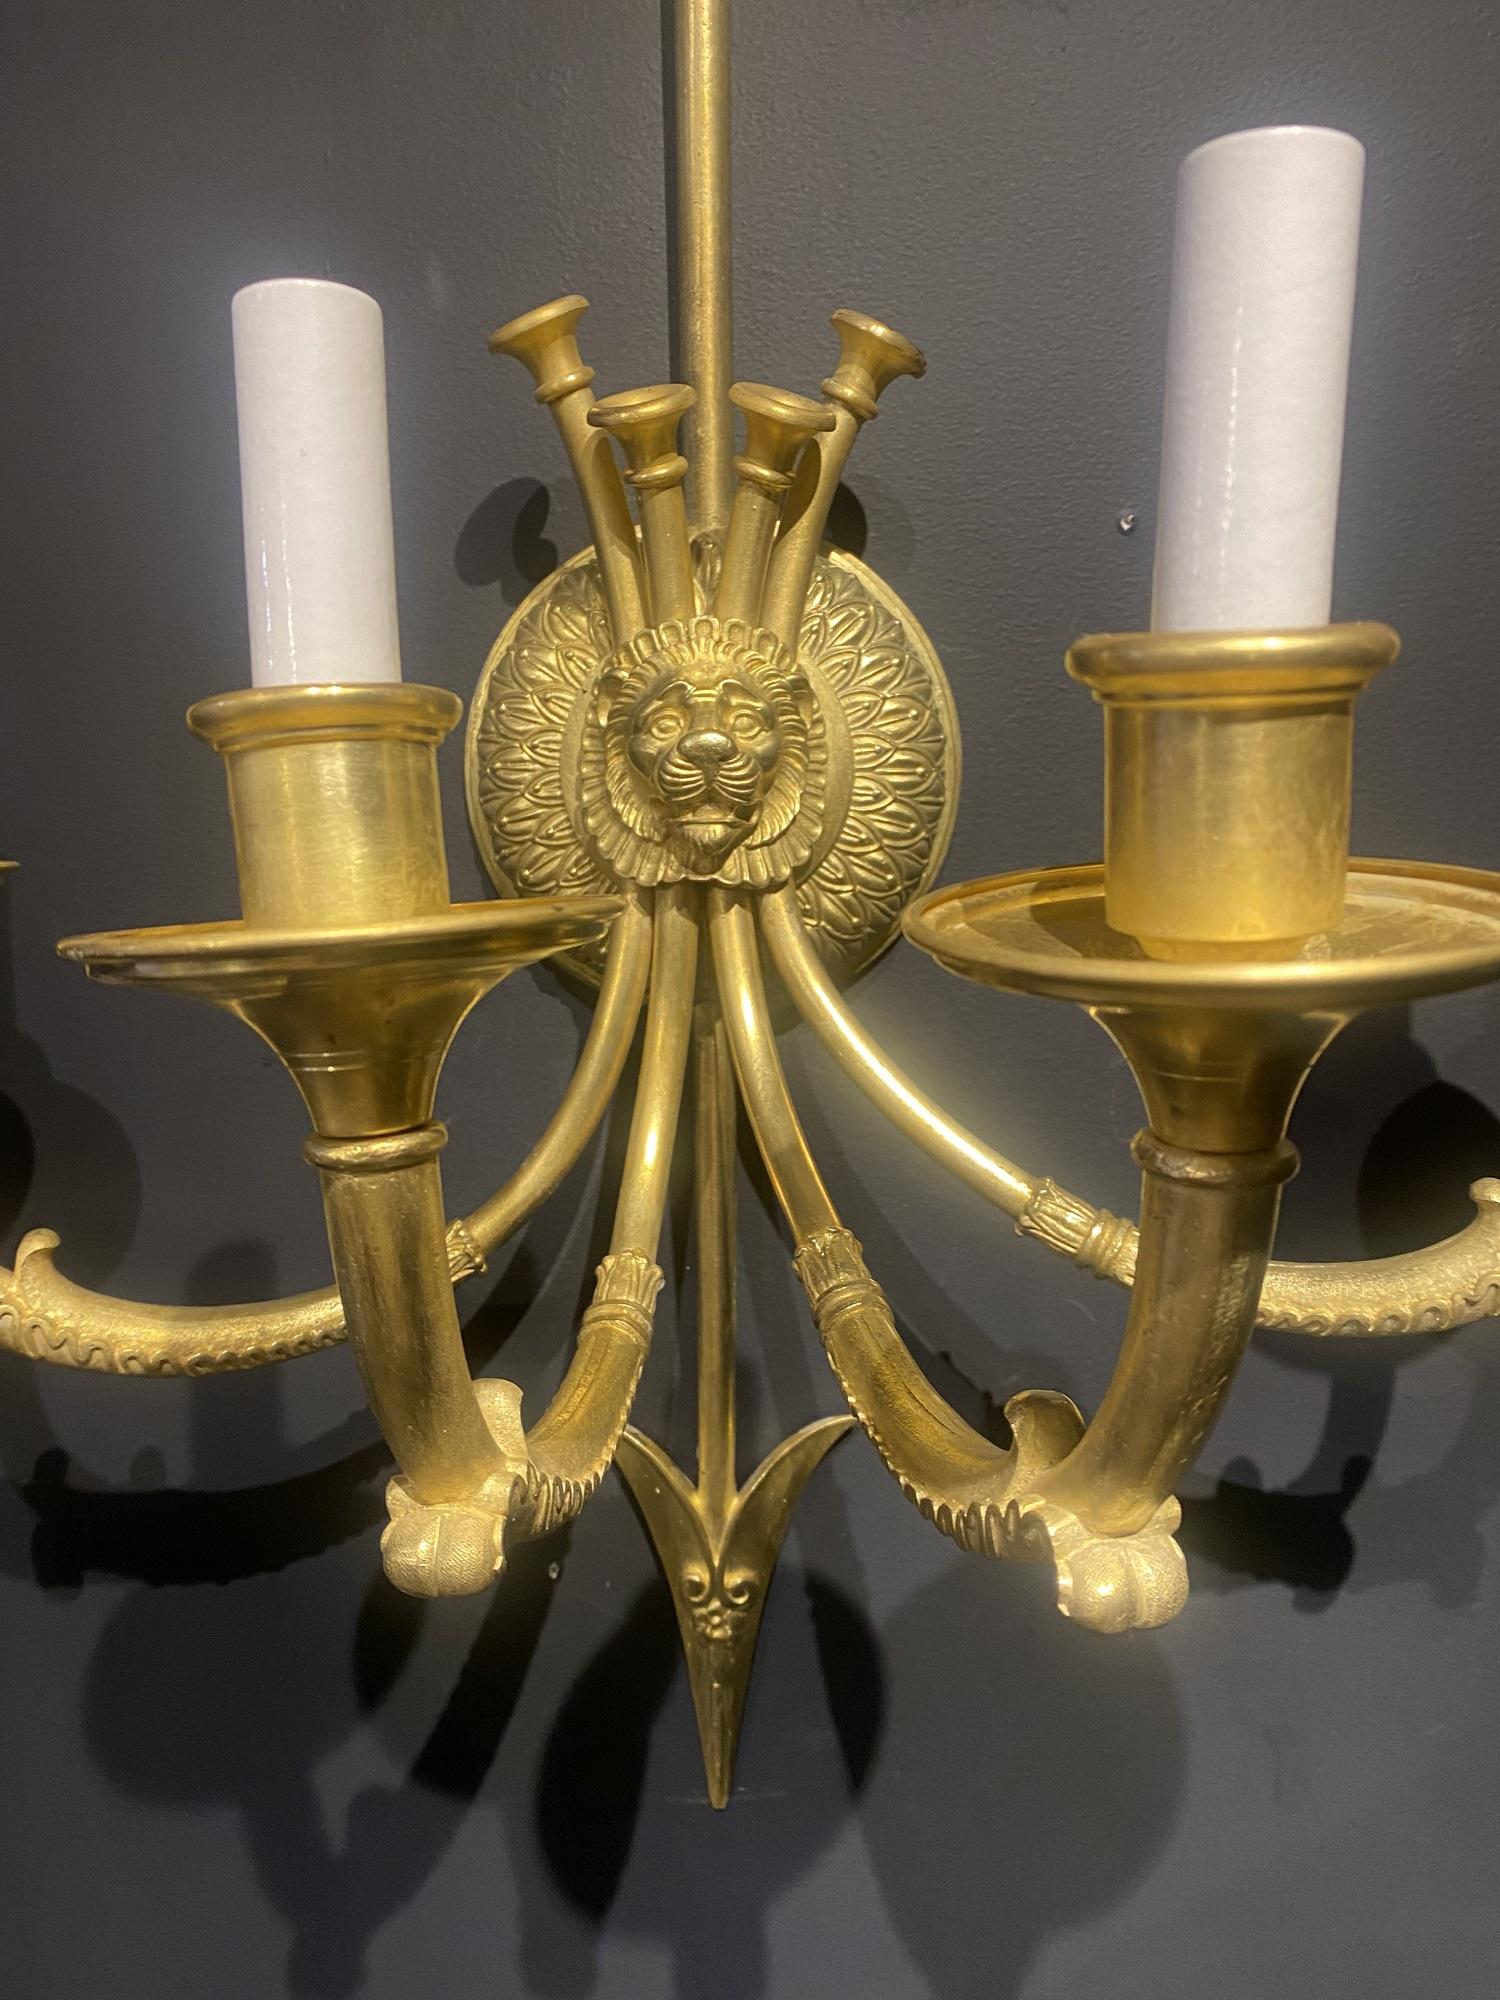 20th Century Pair of Large Caldwell Empire Sconces